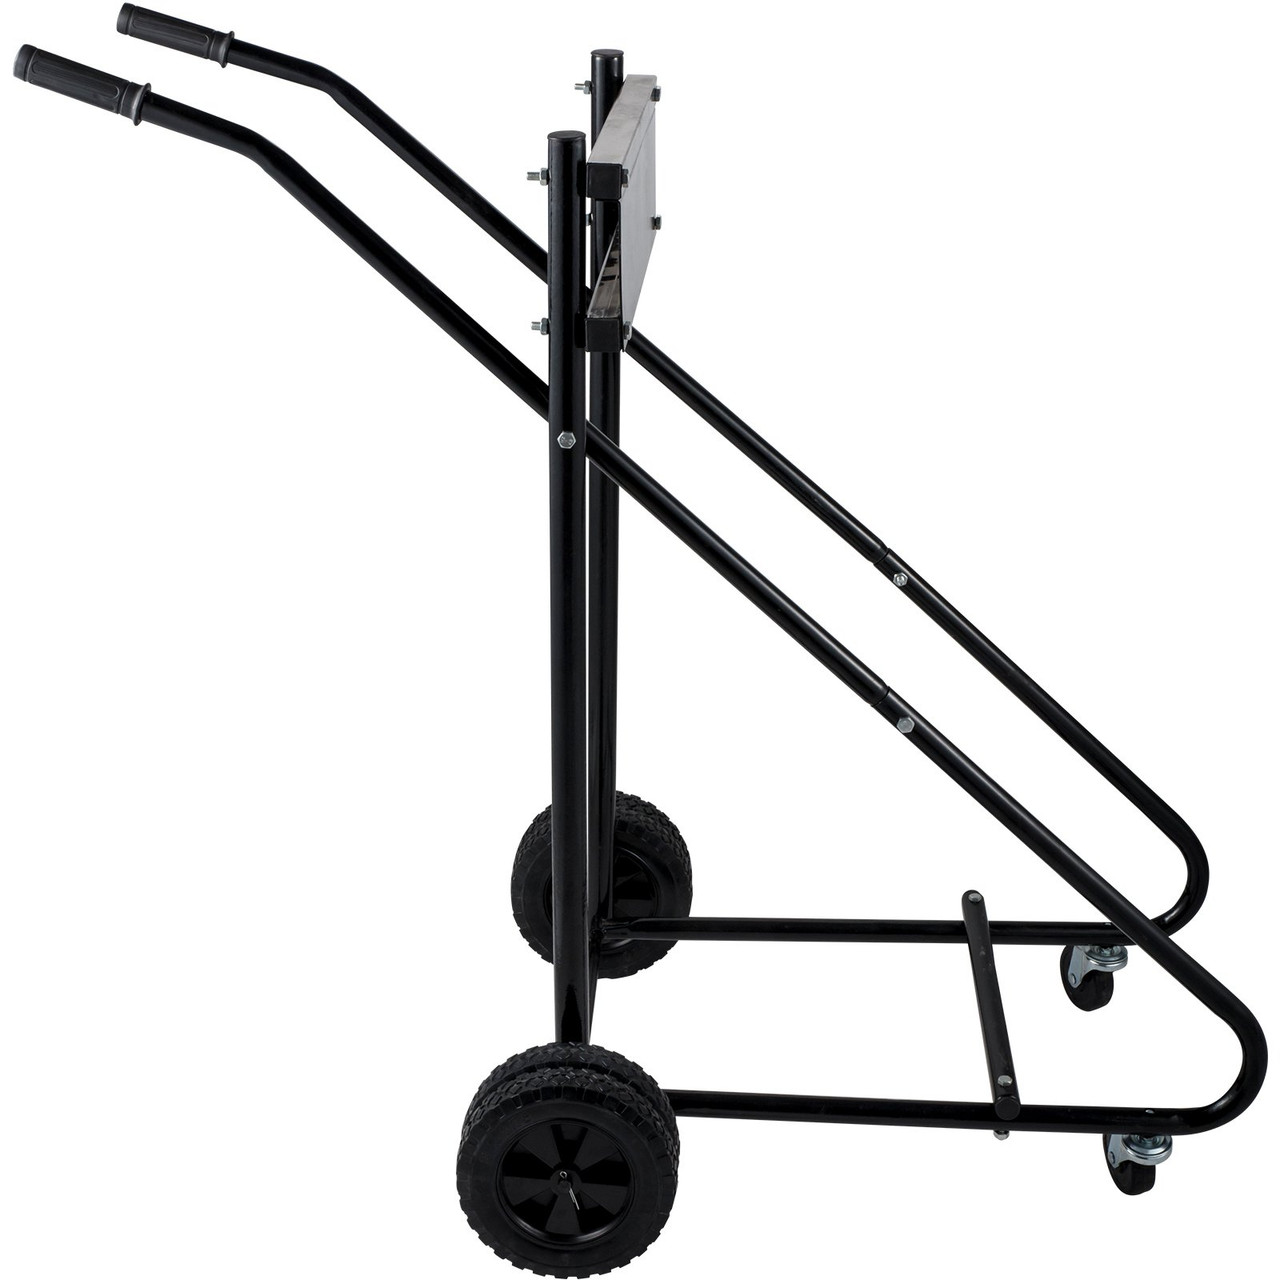 OutBoat Motor Stand, 350 LBS Board Motor Carrier, 160 KG Outboard Engine Stand, Six Wheels Boat Motor Dolly, Heavy Duty Multi Purposed Portable Boat Motor for Motor Repair, Maintenance, Storage